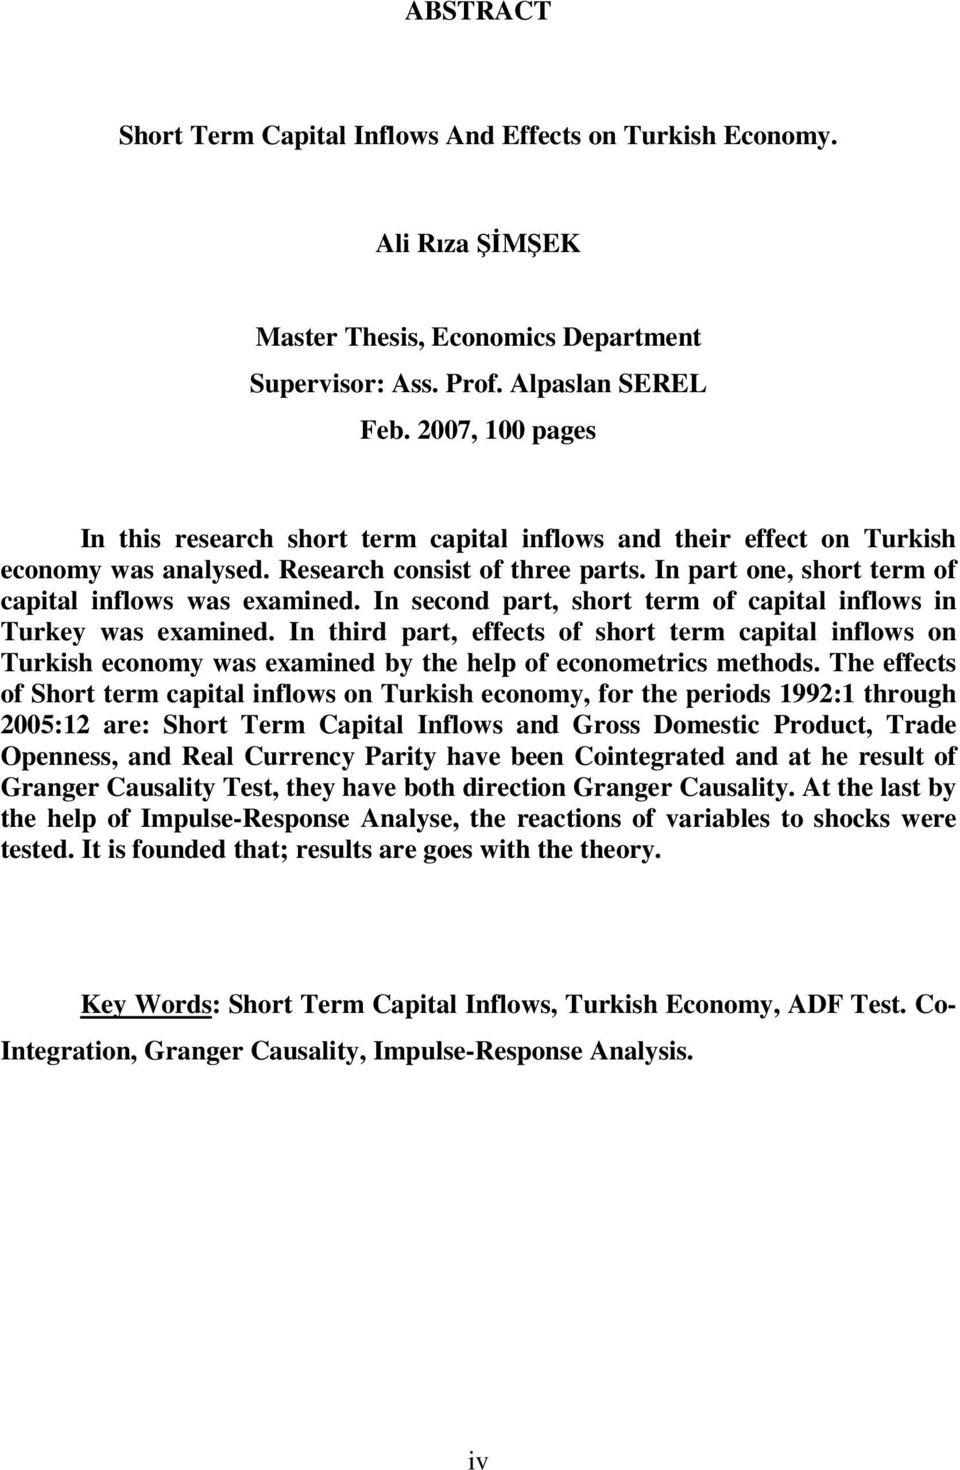 In second part, short term of capital inflows in Turkey was examined. In third part, effects of short term capital inflows on Turkish economy was examined by the help of econometrics methods.